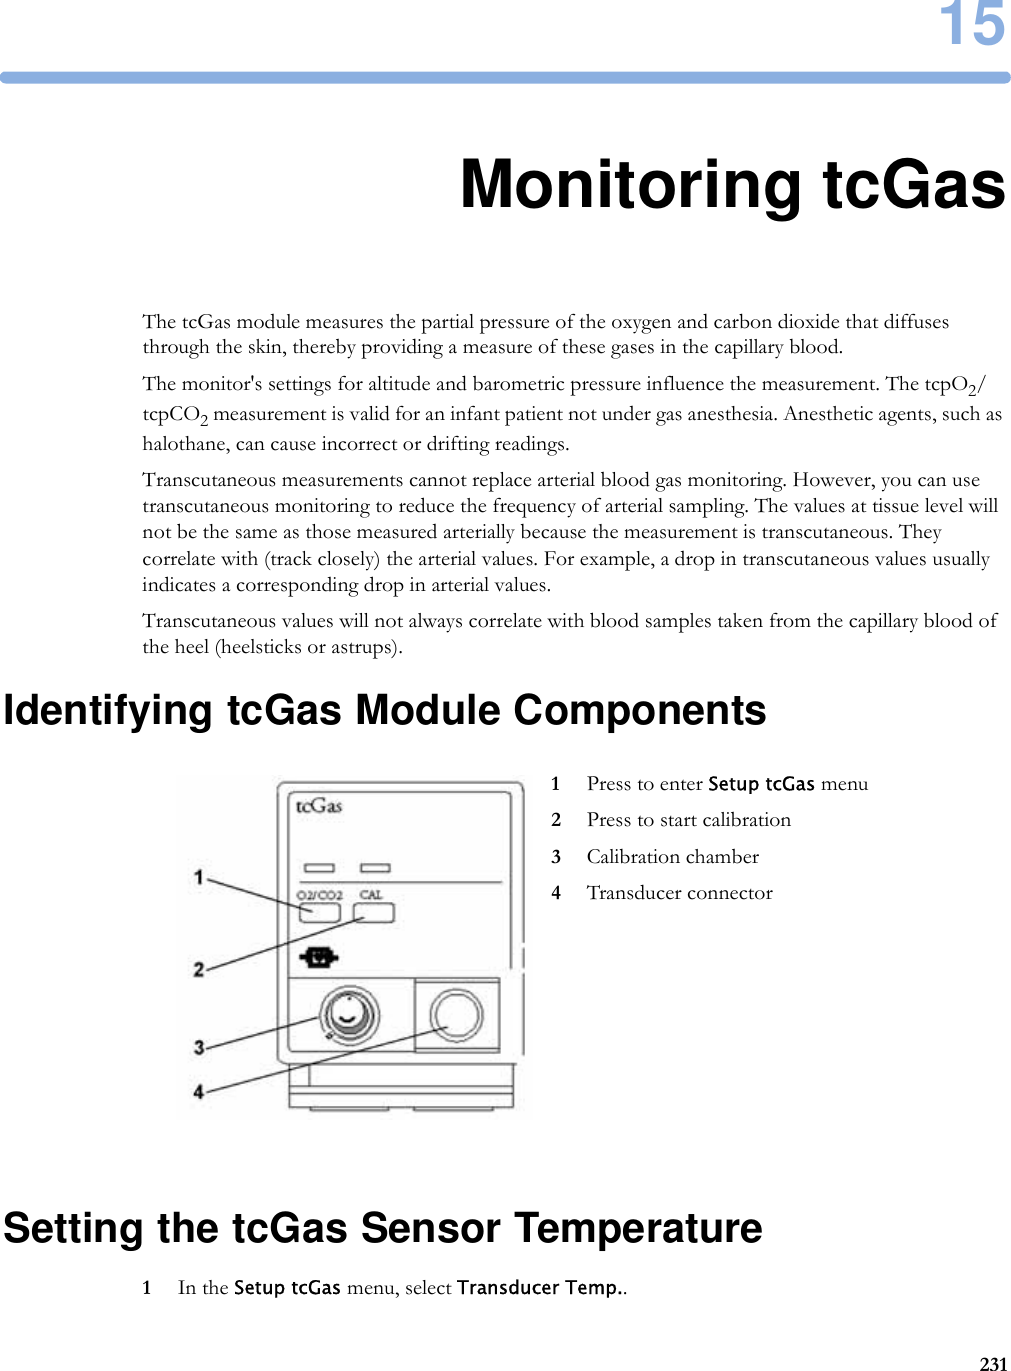 1523115Monitoring tcGasThe tcGas module measures the partial pressure of the oxygen and carbon dioxide that diffuses through the skin, thereby providing a measure of these gases in the capillary blood.The monitor&apos;s settings for altitude and barometric pressure influence the measurement. The tcpO2/tcpCO2 measurement is valid for an infant patient not under gas anesthesia. Anesthetic agents, such as halothane, can cause incorrect or drifting readings.Transcutaneous measurements cannot replace arterial blood gas monitoring. However, you can use transcutaneous monitoring to reduce the frequency of arterial sampling. The values at tissue level will not be the same as those measured arterially because the measurement is transcutaneous. They correlate with (track closely) the arterial values. For example, a drop in transcutaneous values usually indicates a corresponding drop in arterial values.Transcutaneous values will not always correlate with blood samples taken from the capillary blood of the heel (heelsticks or astrups).Identifying tcGas Module ComponentsSetting the tcGas Sensor Temperature1In the Setup tcGas menu, select Transducer Temp..1Press to enter Setup tcGas menu2Press to start calibration3Calibration chamber4Transducer connector